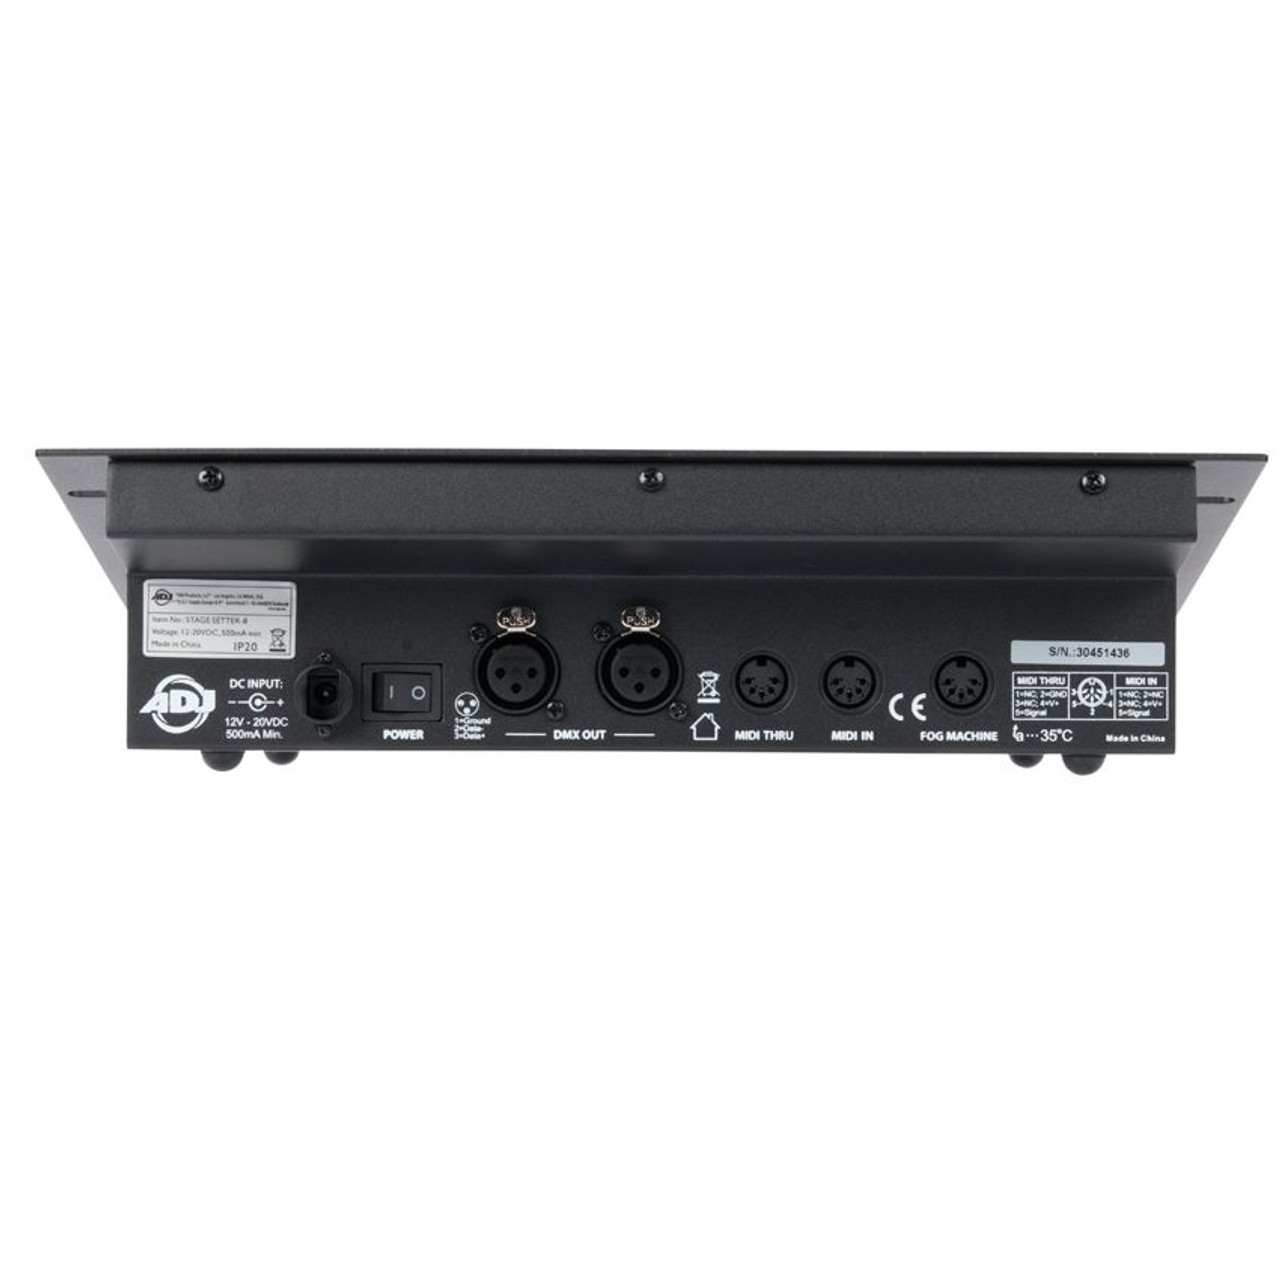 ADJ STAGE SETTER Channel Dimming Controller GoKnight